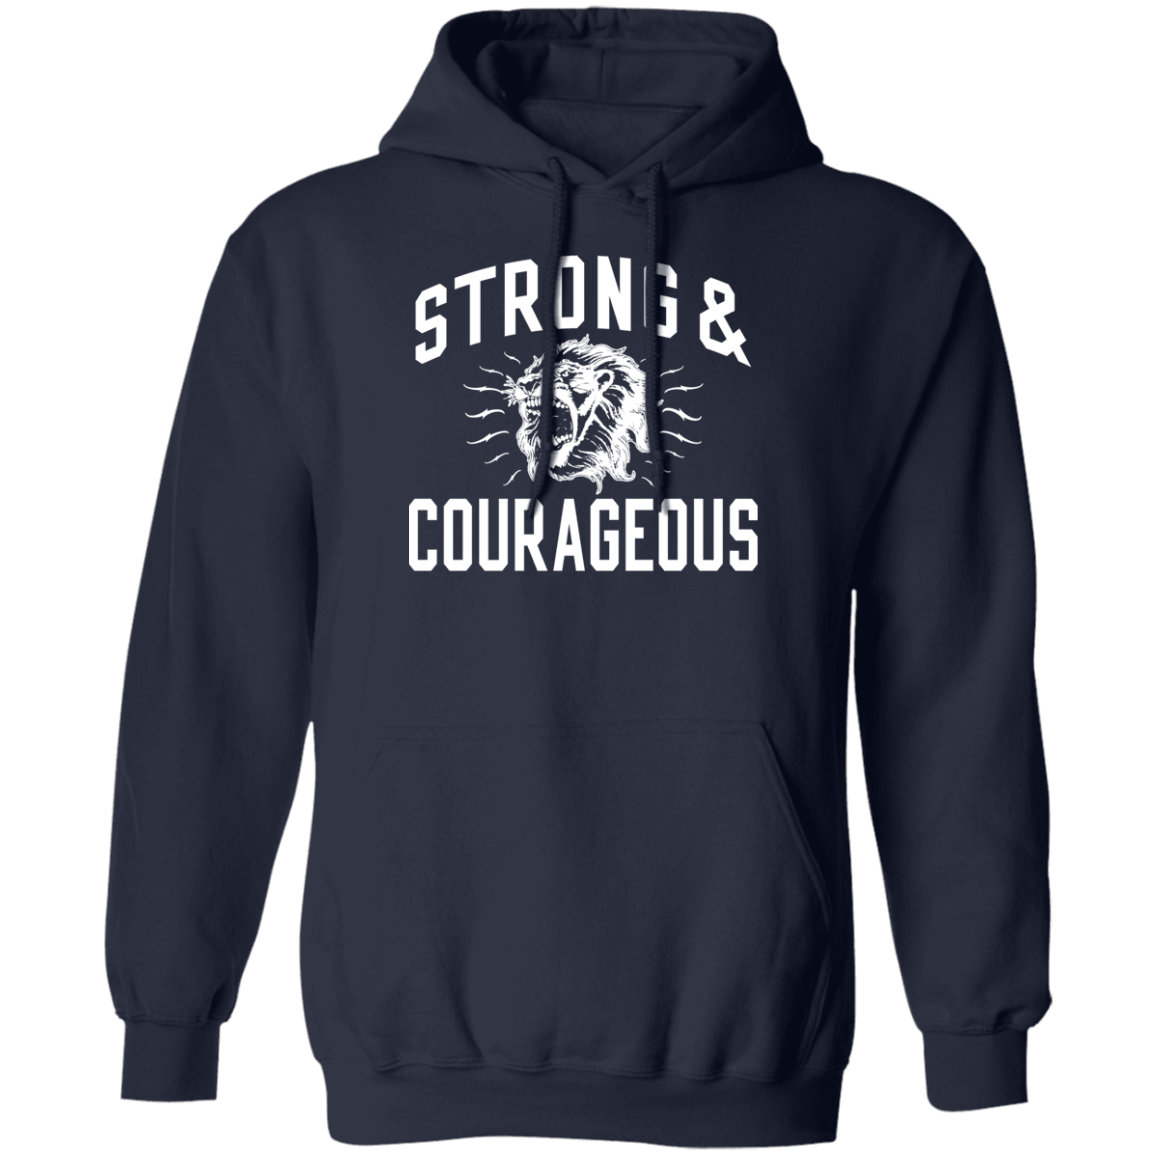 Strong & Courageous Hoodie